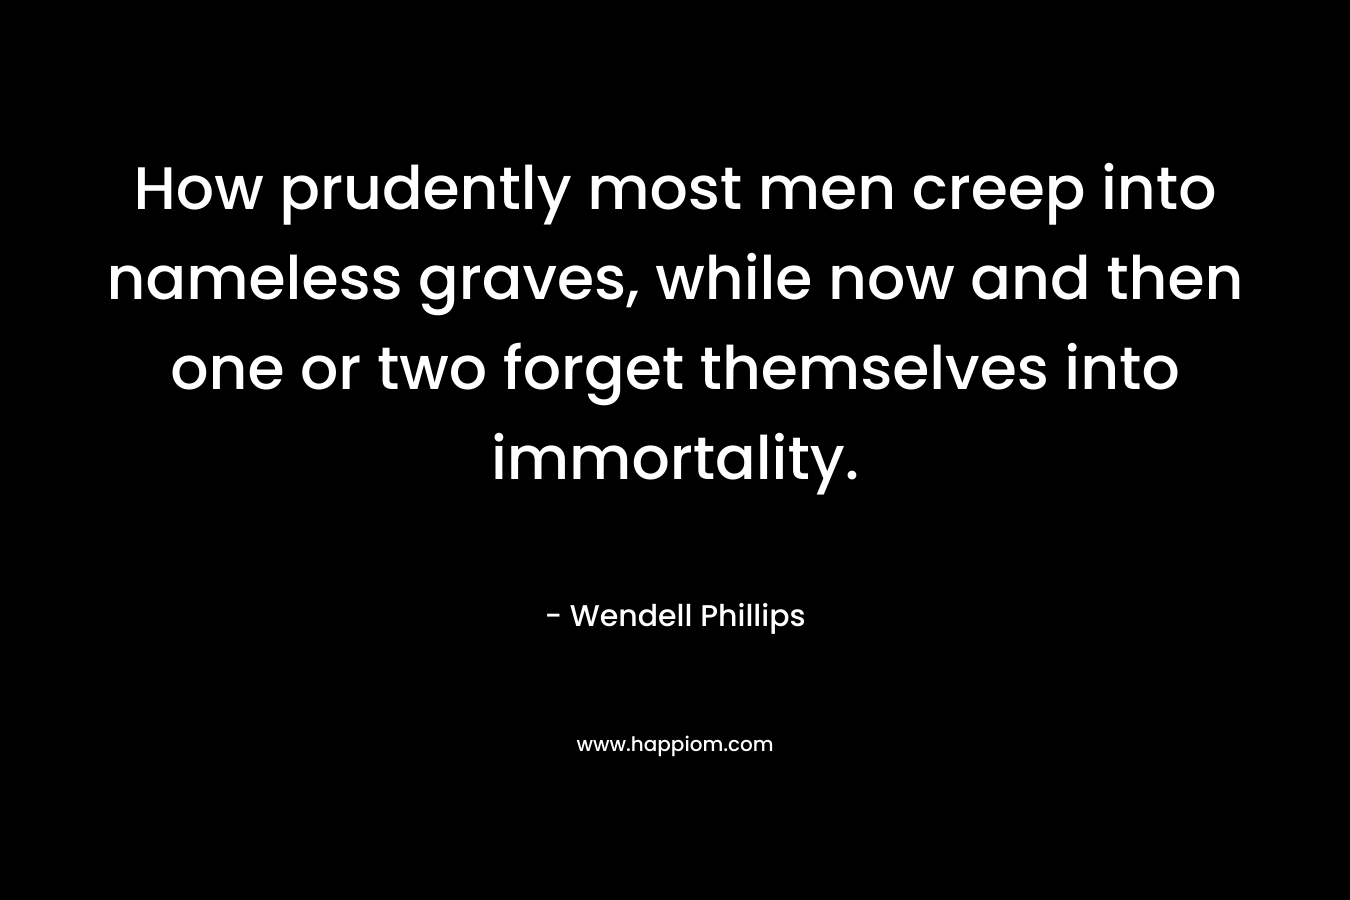 How prudently most men creep into nameless graves, while now and then one or two forget themselves into immortality.